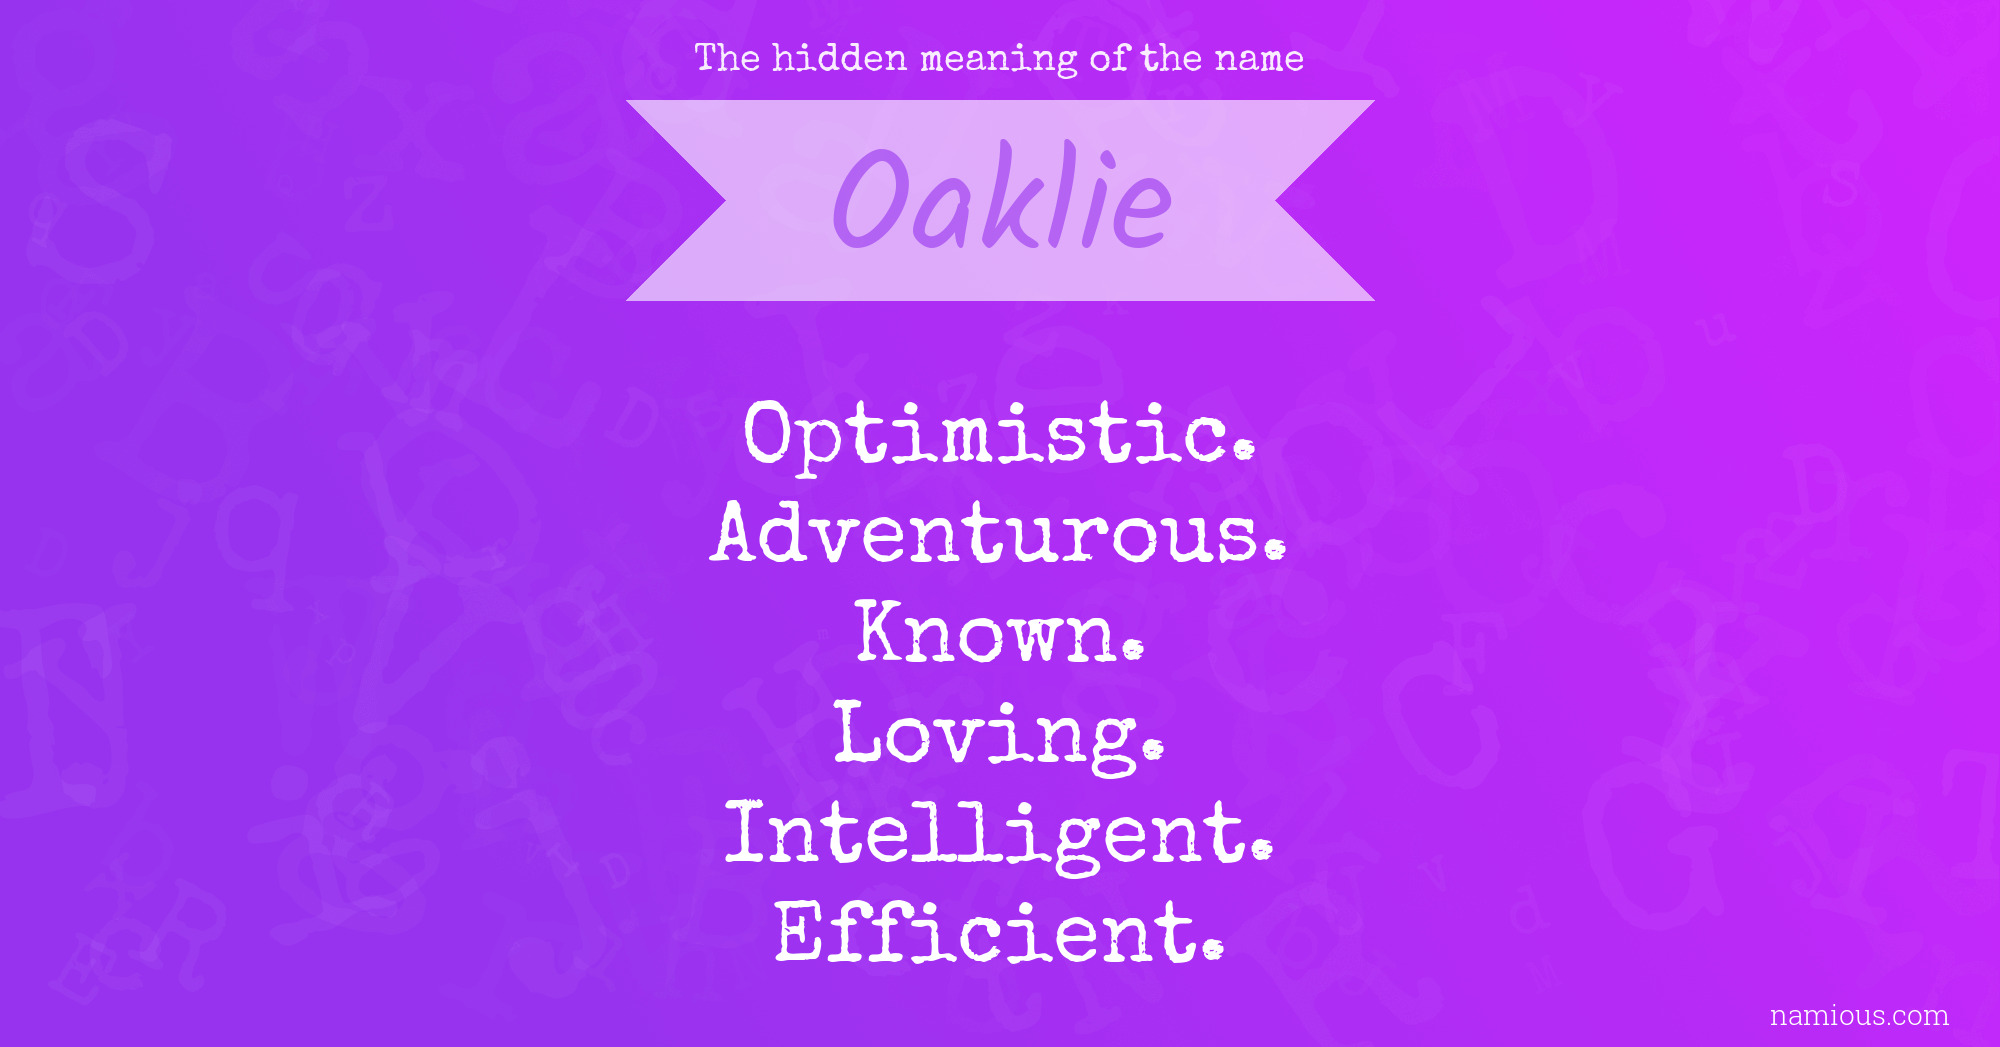 The hidden meaning of the name Oaklie